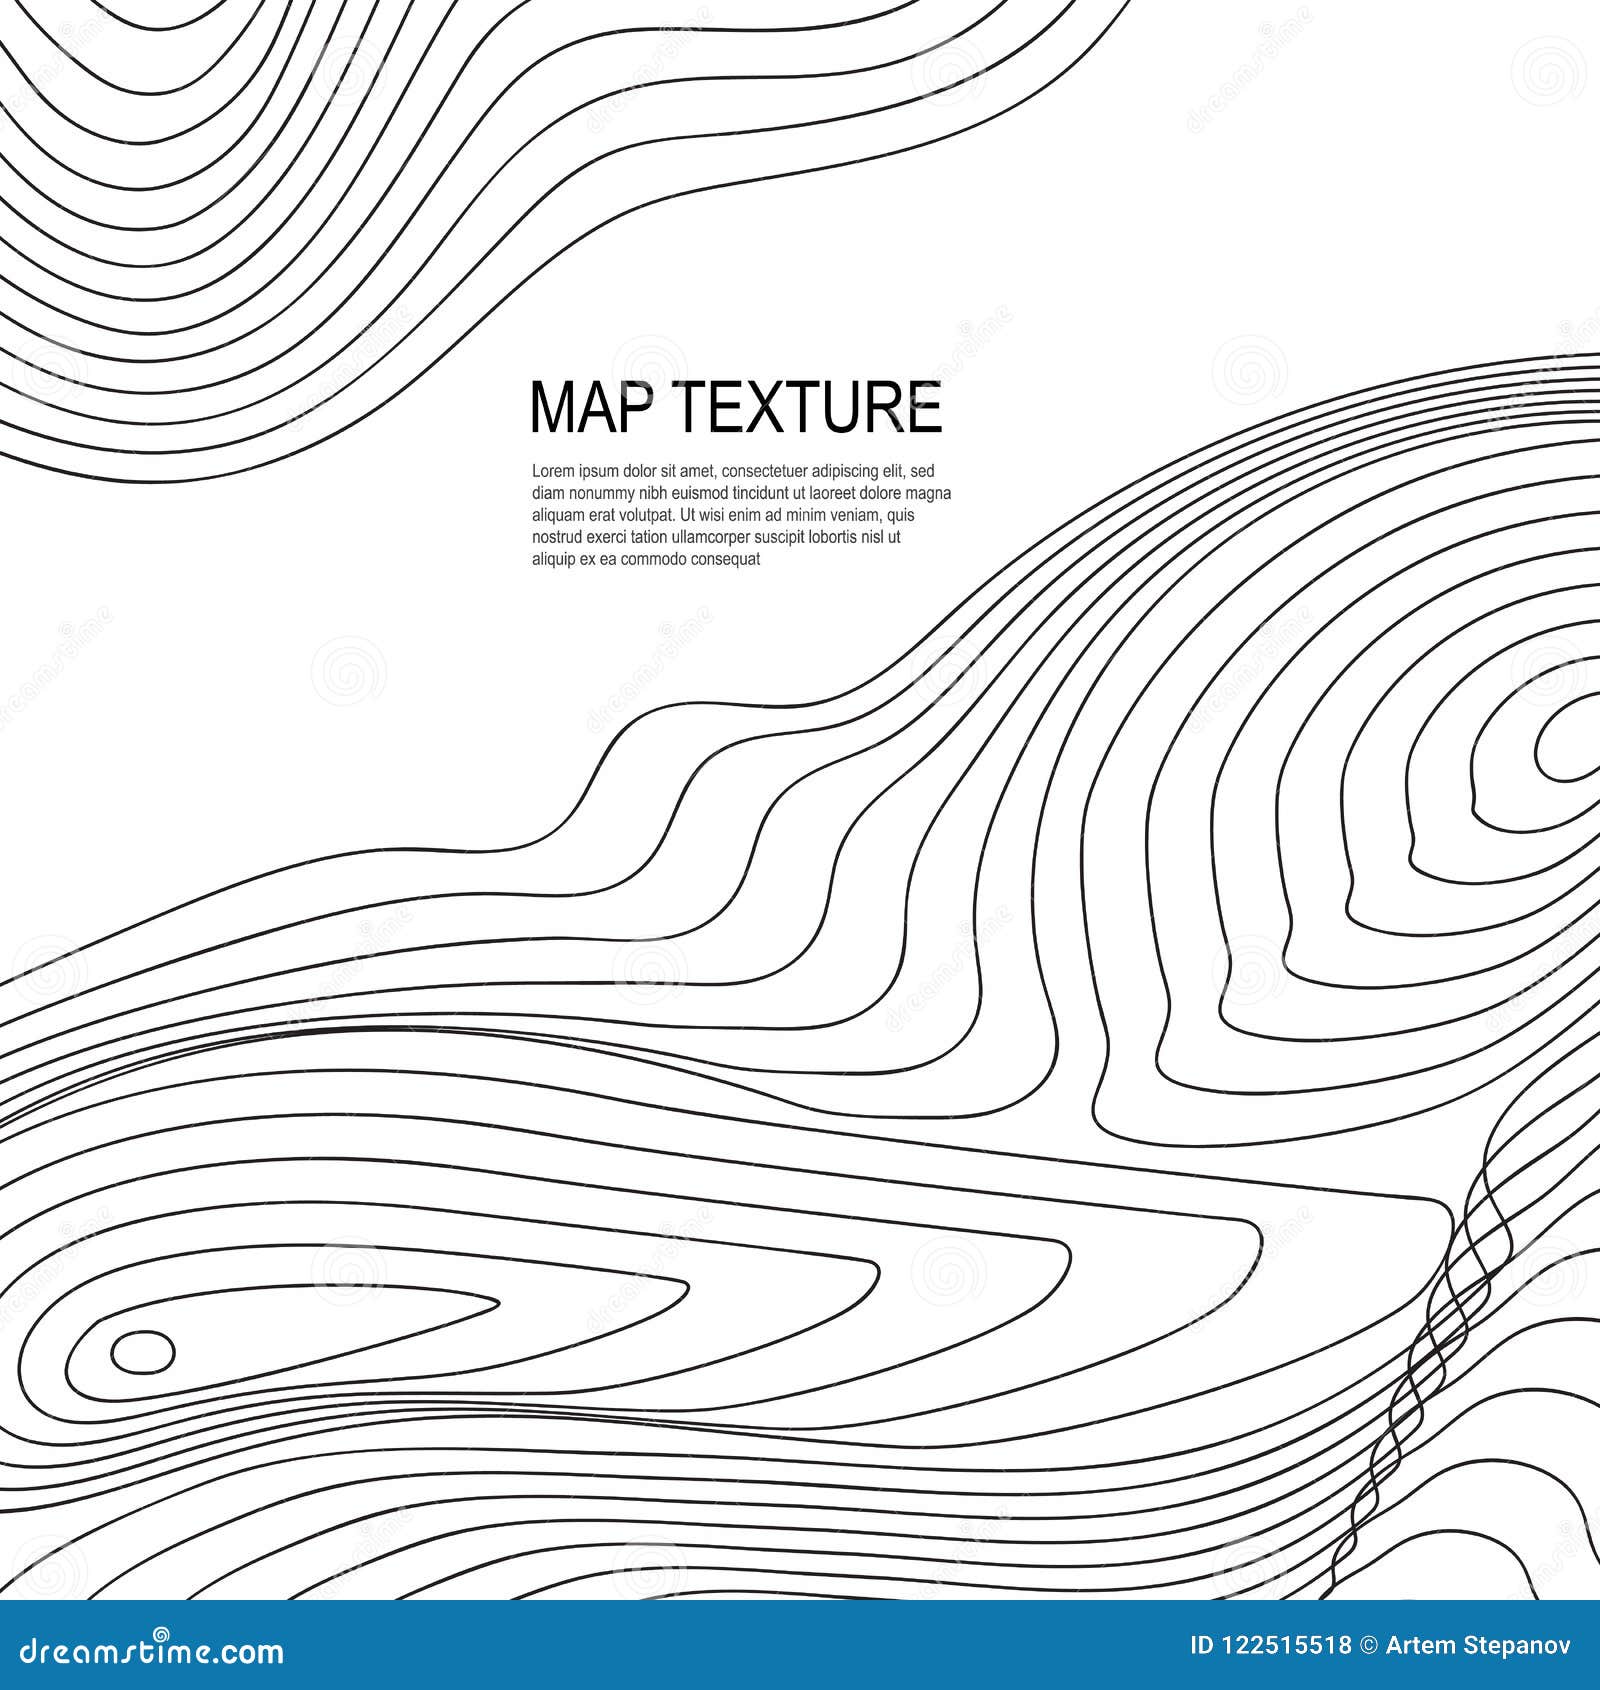 topographical terrain map with line contours